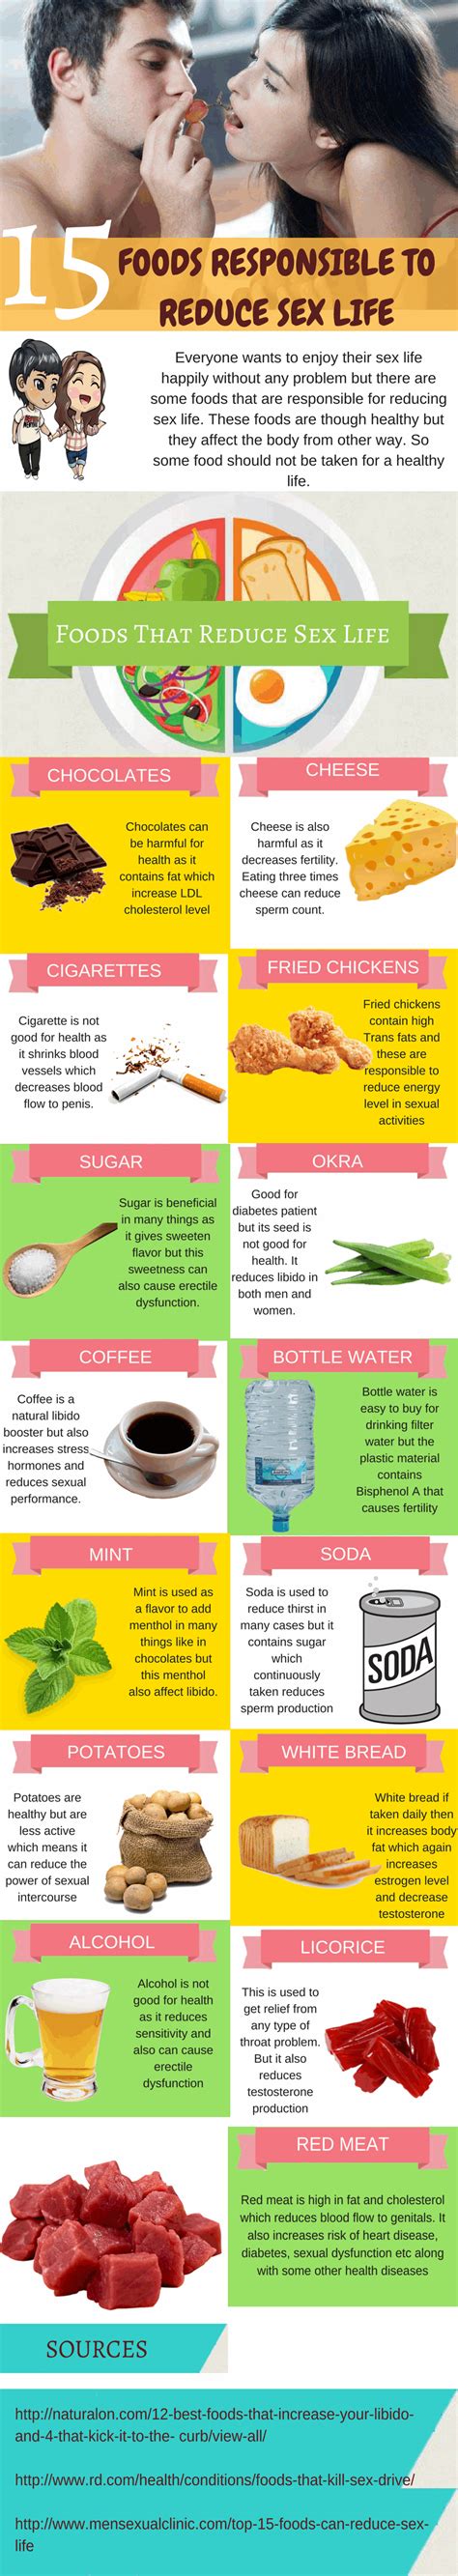 [infographic] 15 Foods That Are Responsible To Reduce Sexual Life